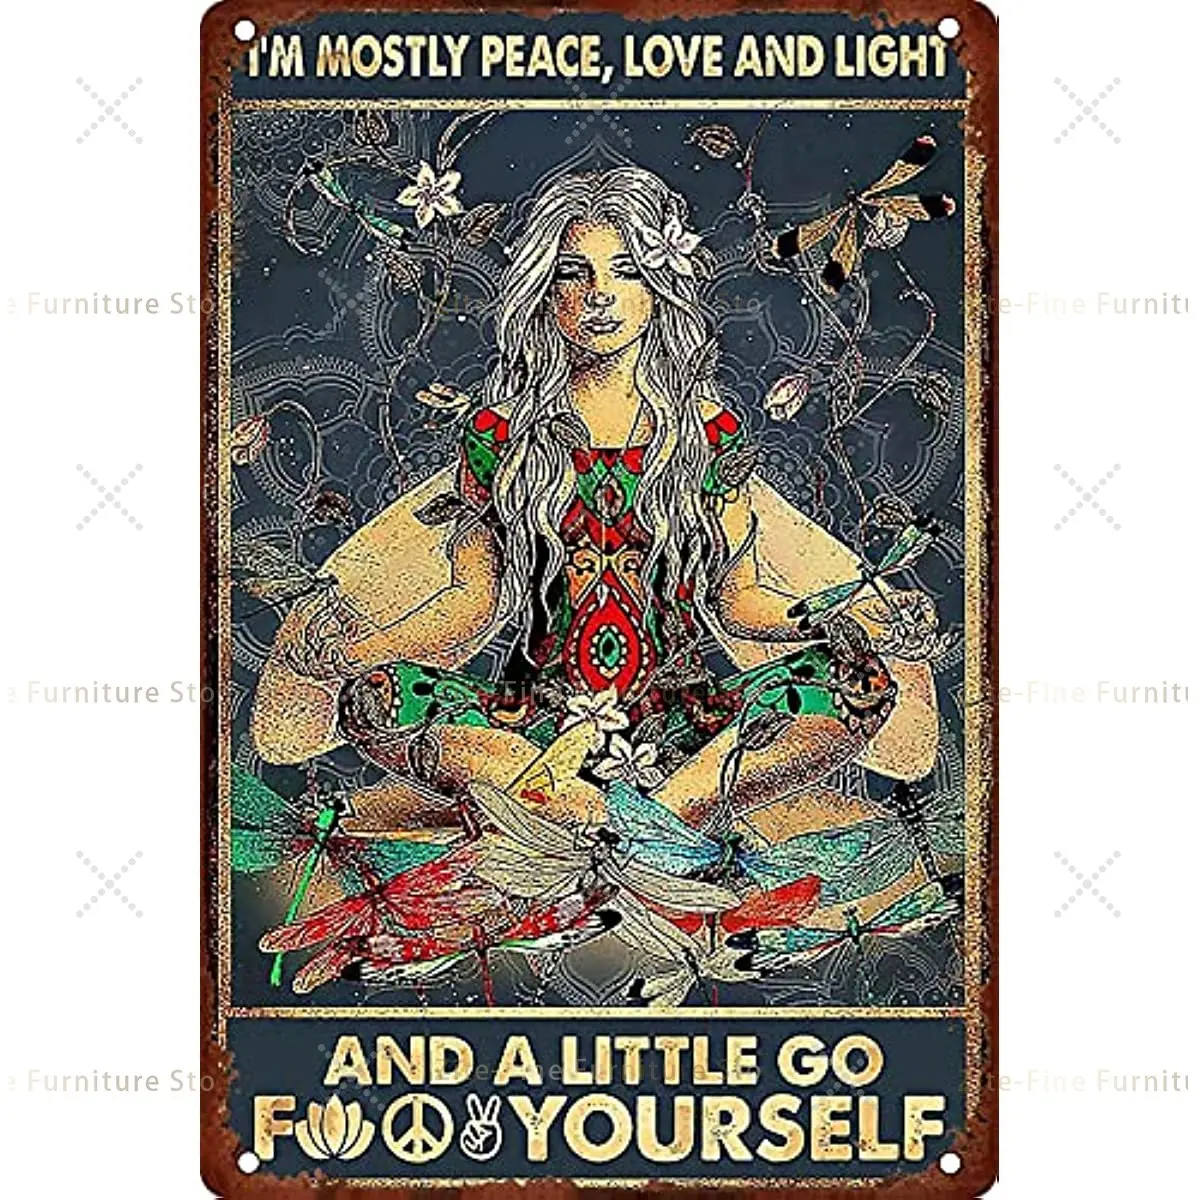 

8x12 Inches I'm Mostly Peace Love and Light Tin Sign Wall Decor Metal Sign Metal Wall Poster Door Plaque Tin Sign